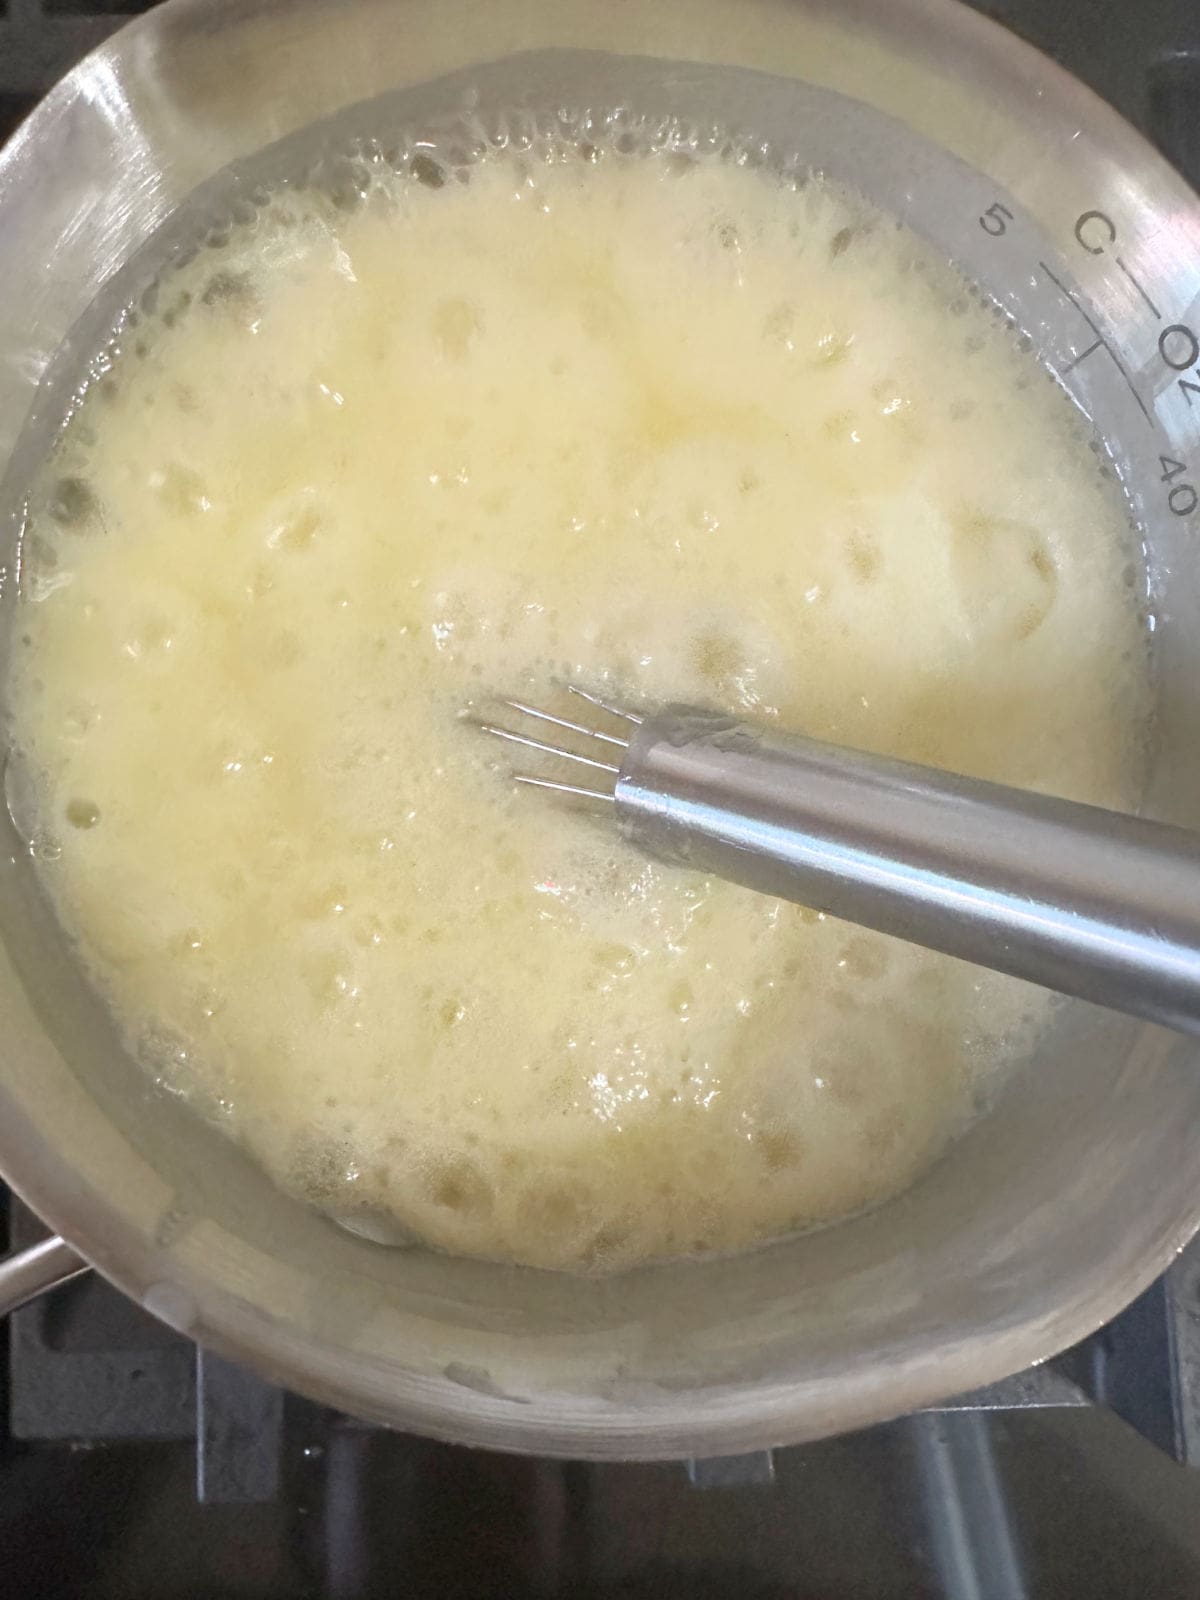 The butter mixture simmering in the saucepan.